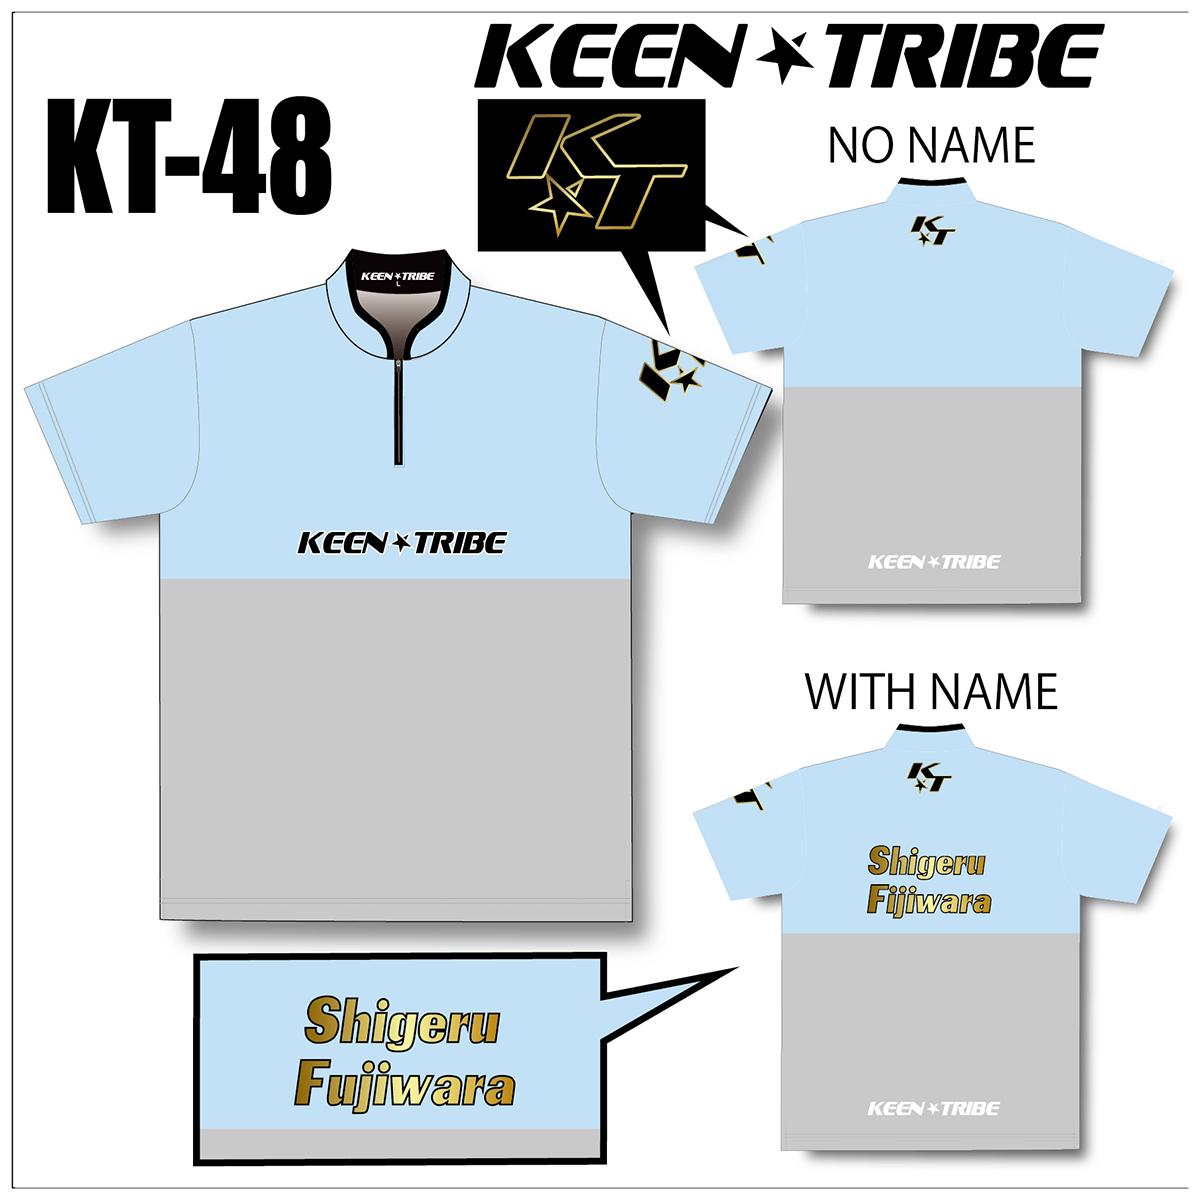 KEEN ★ TRIBE　KT-48(受注生産)